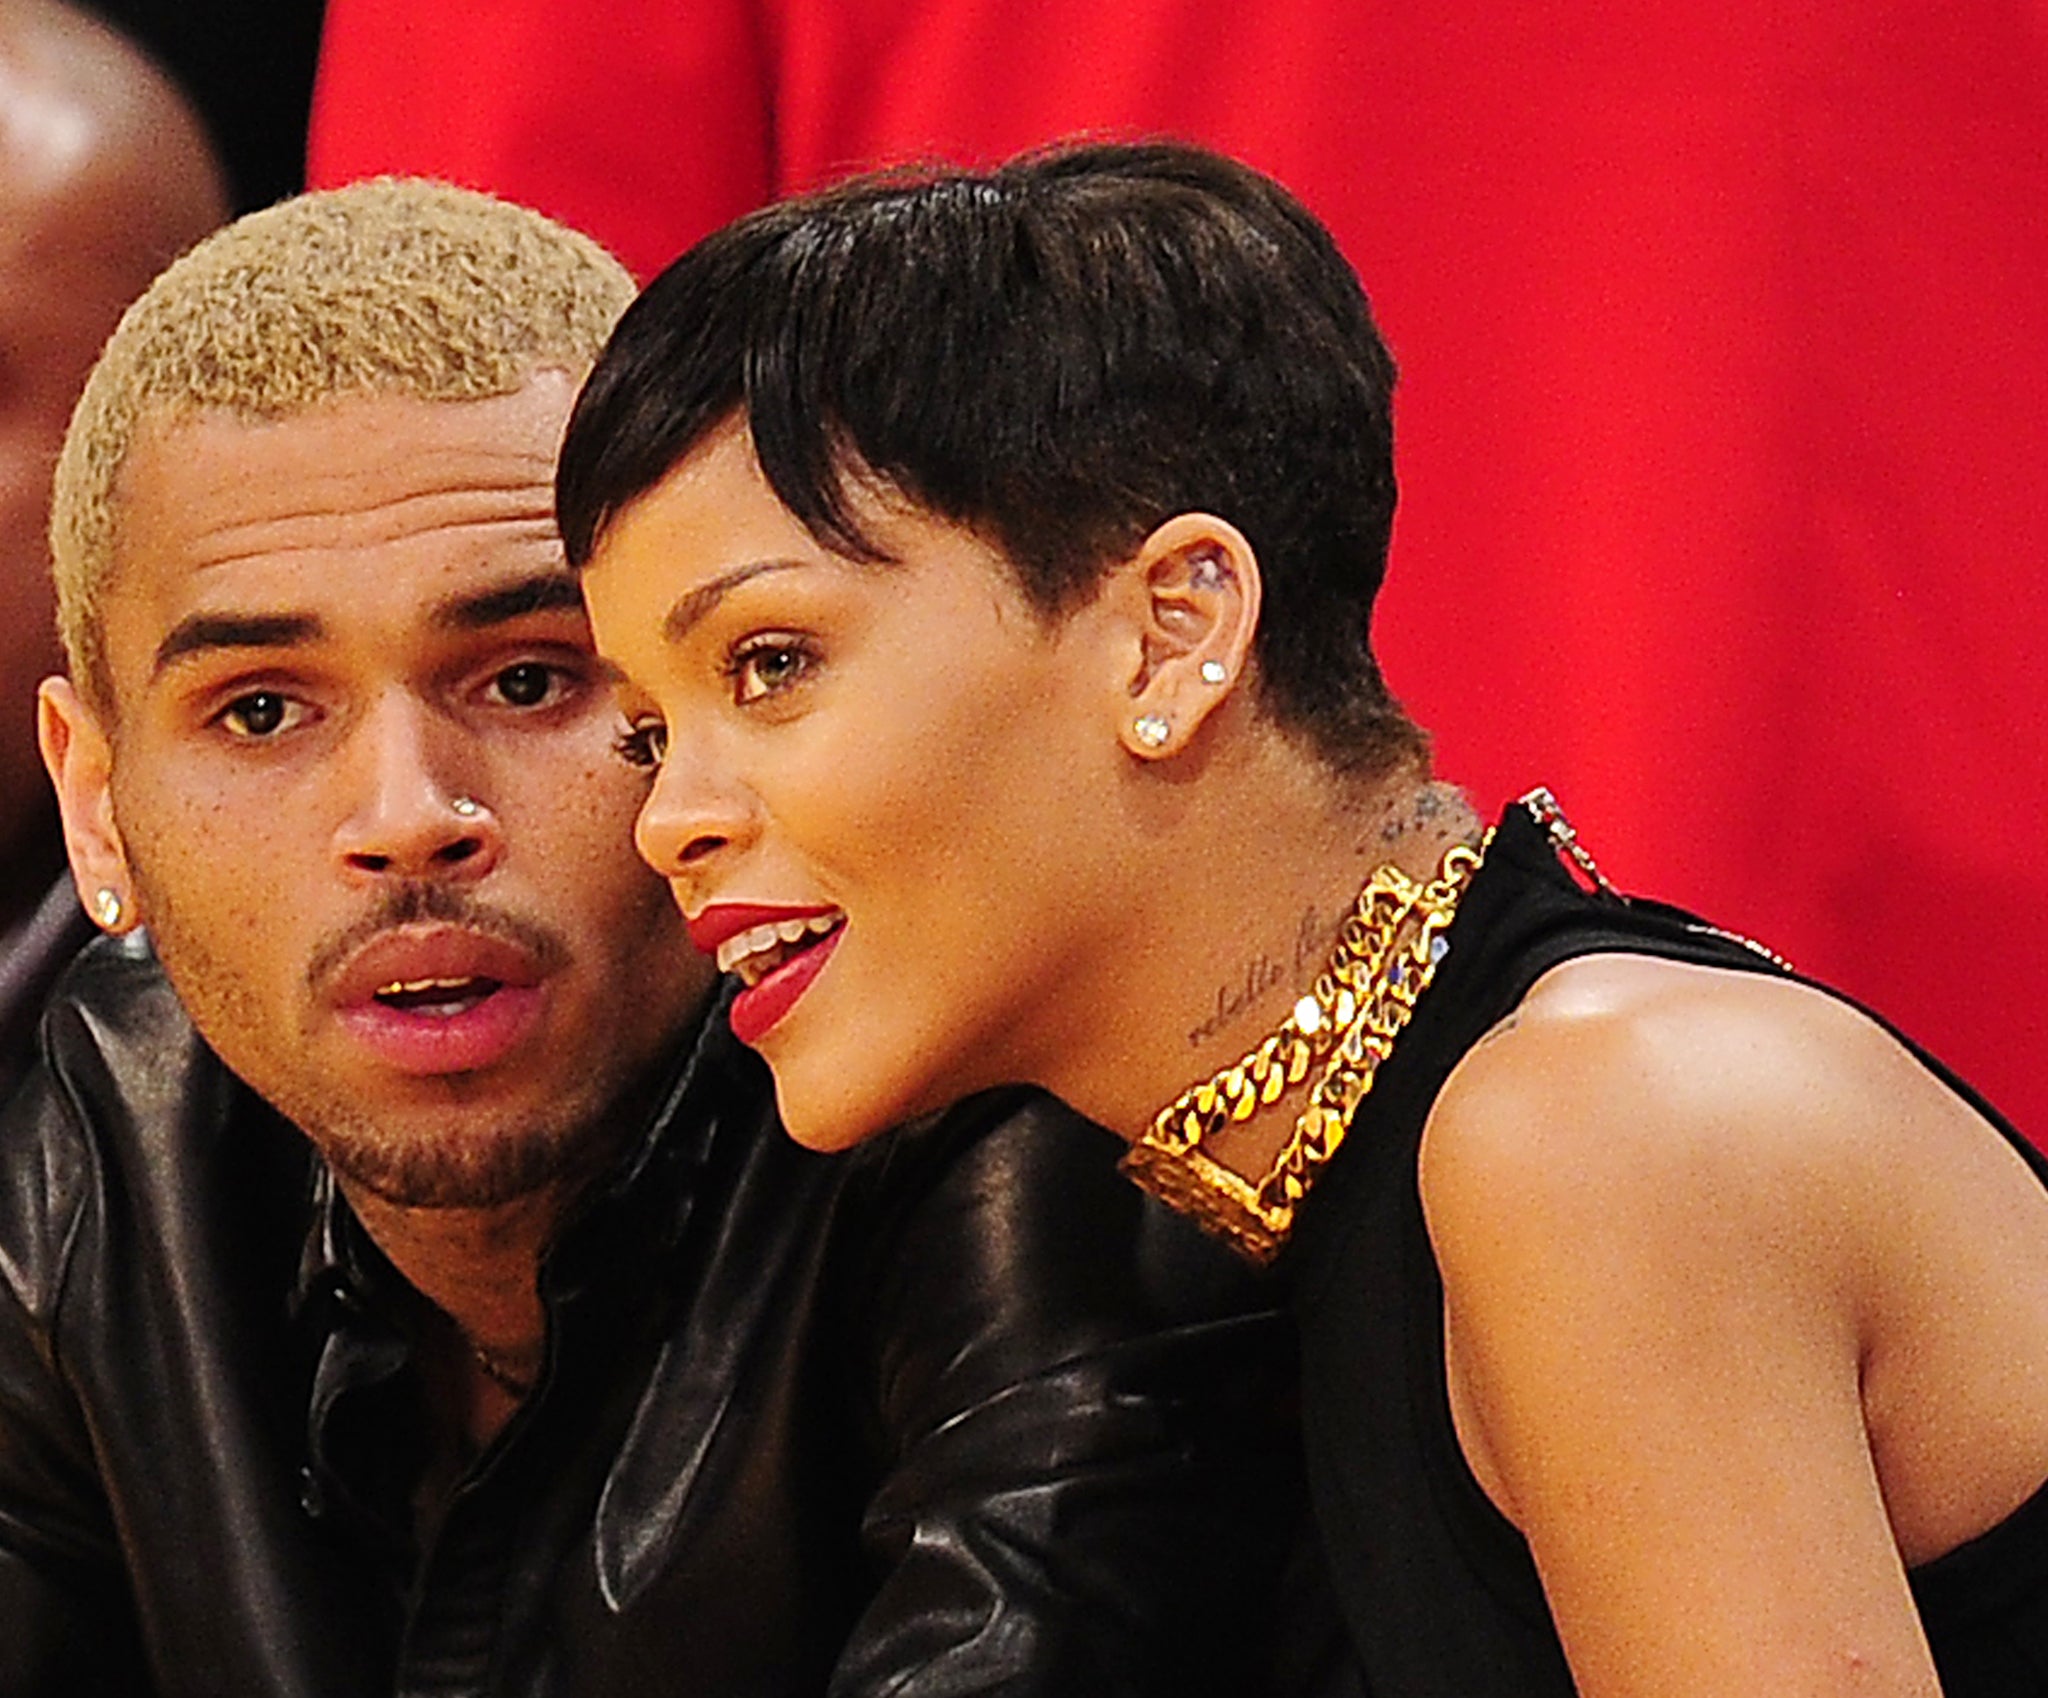 Rihanna and Chris Brown are back together